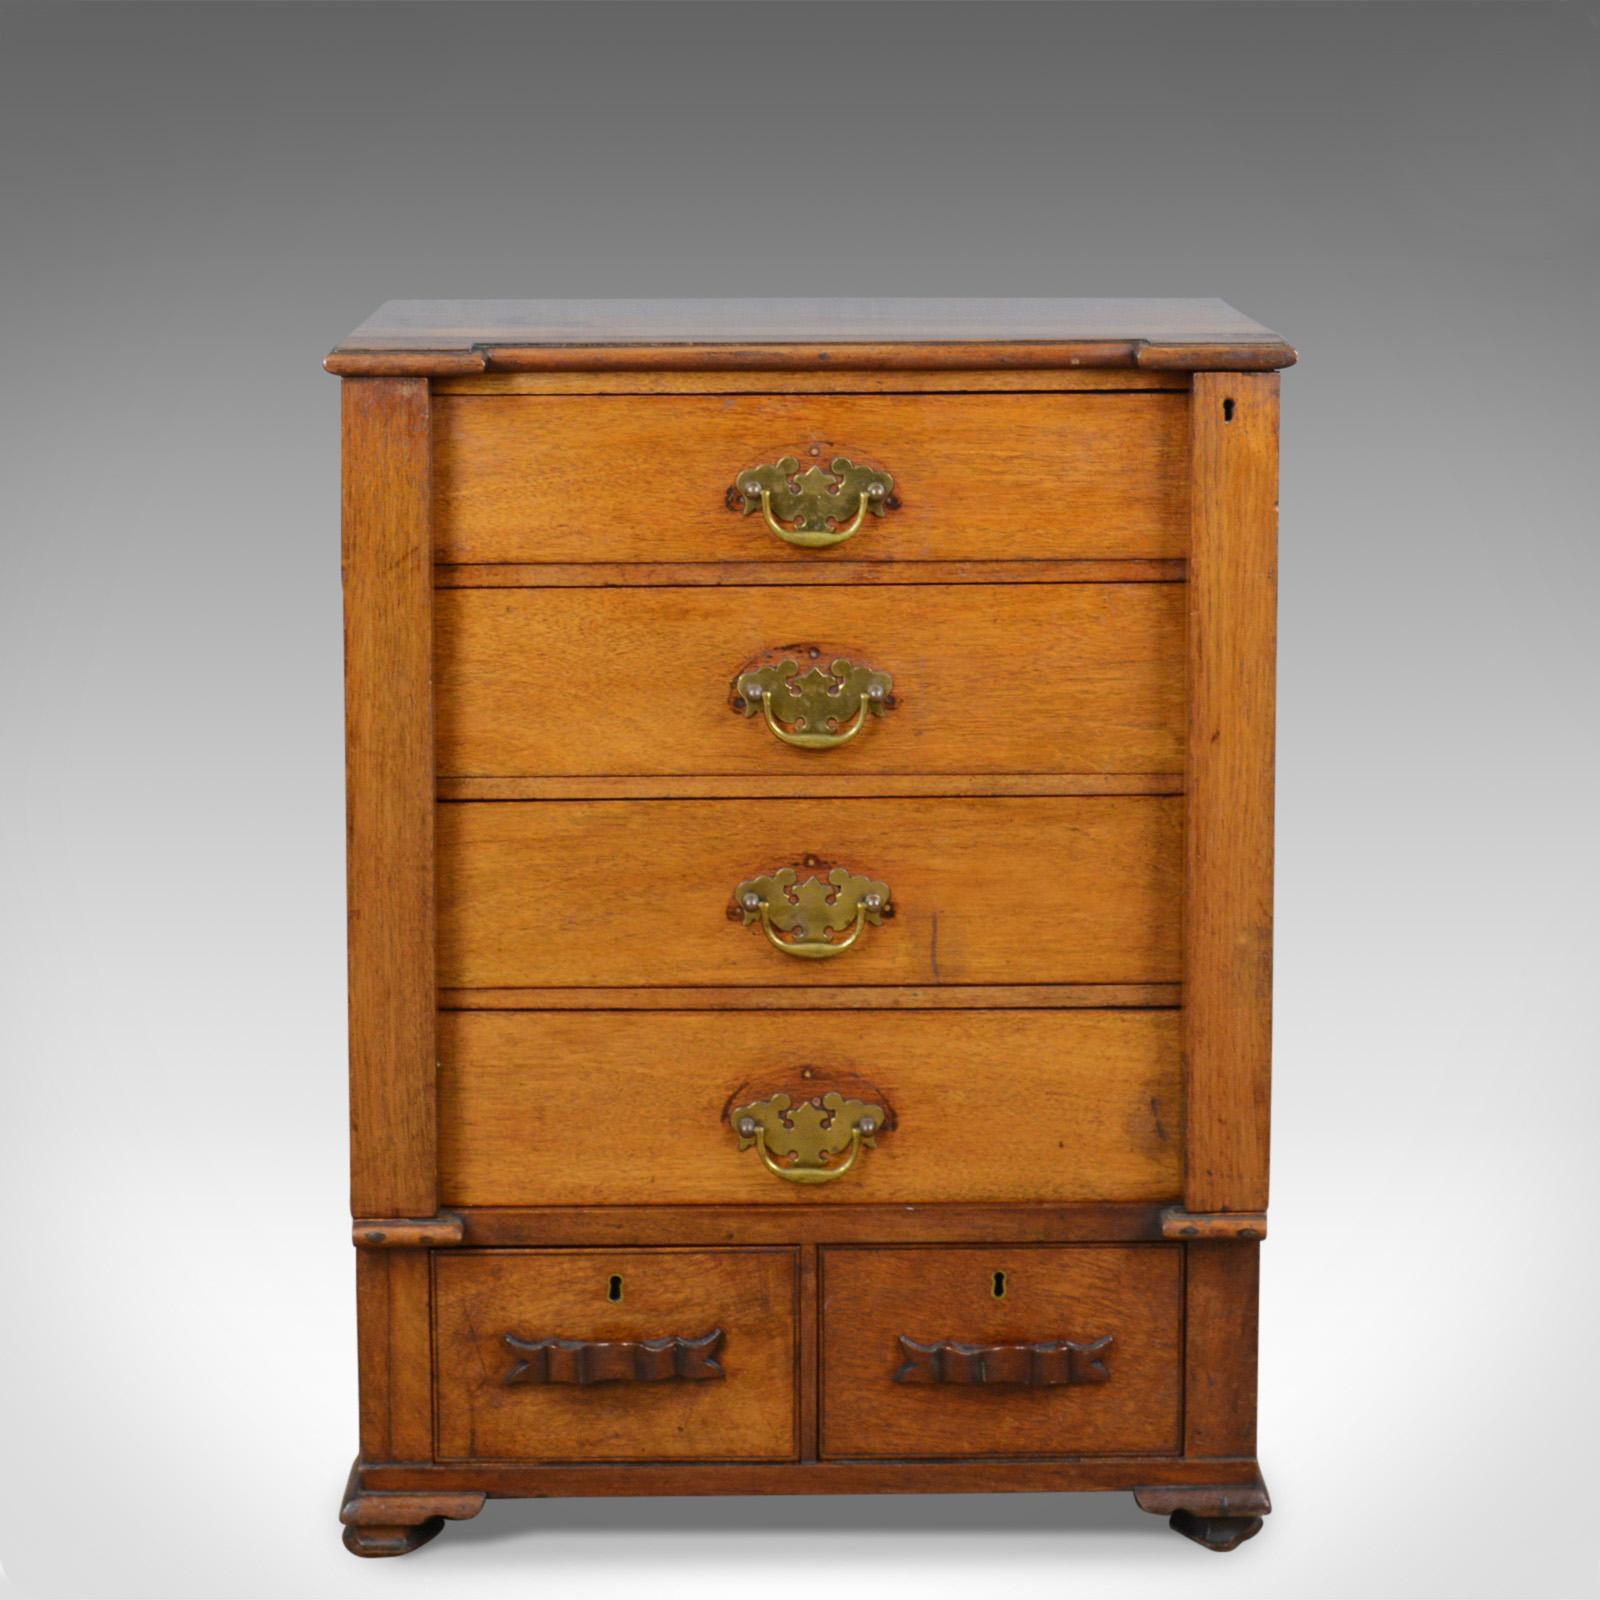 This is a small, antique Wellington chest. An English, oak and fruitwood, Campaign specimen chest of drawers dating to the late 19th century, circa 1890.

Delightful, small Wellington chest
Rich, warm hues to the oak and fruitwood
Grain